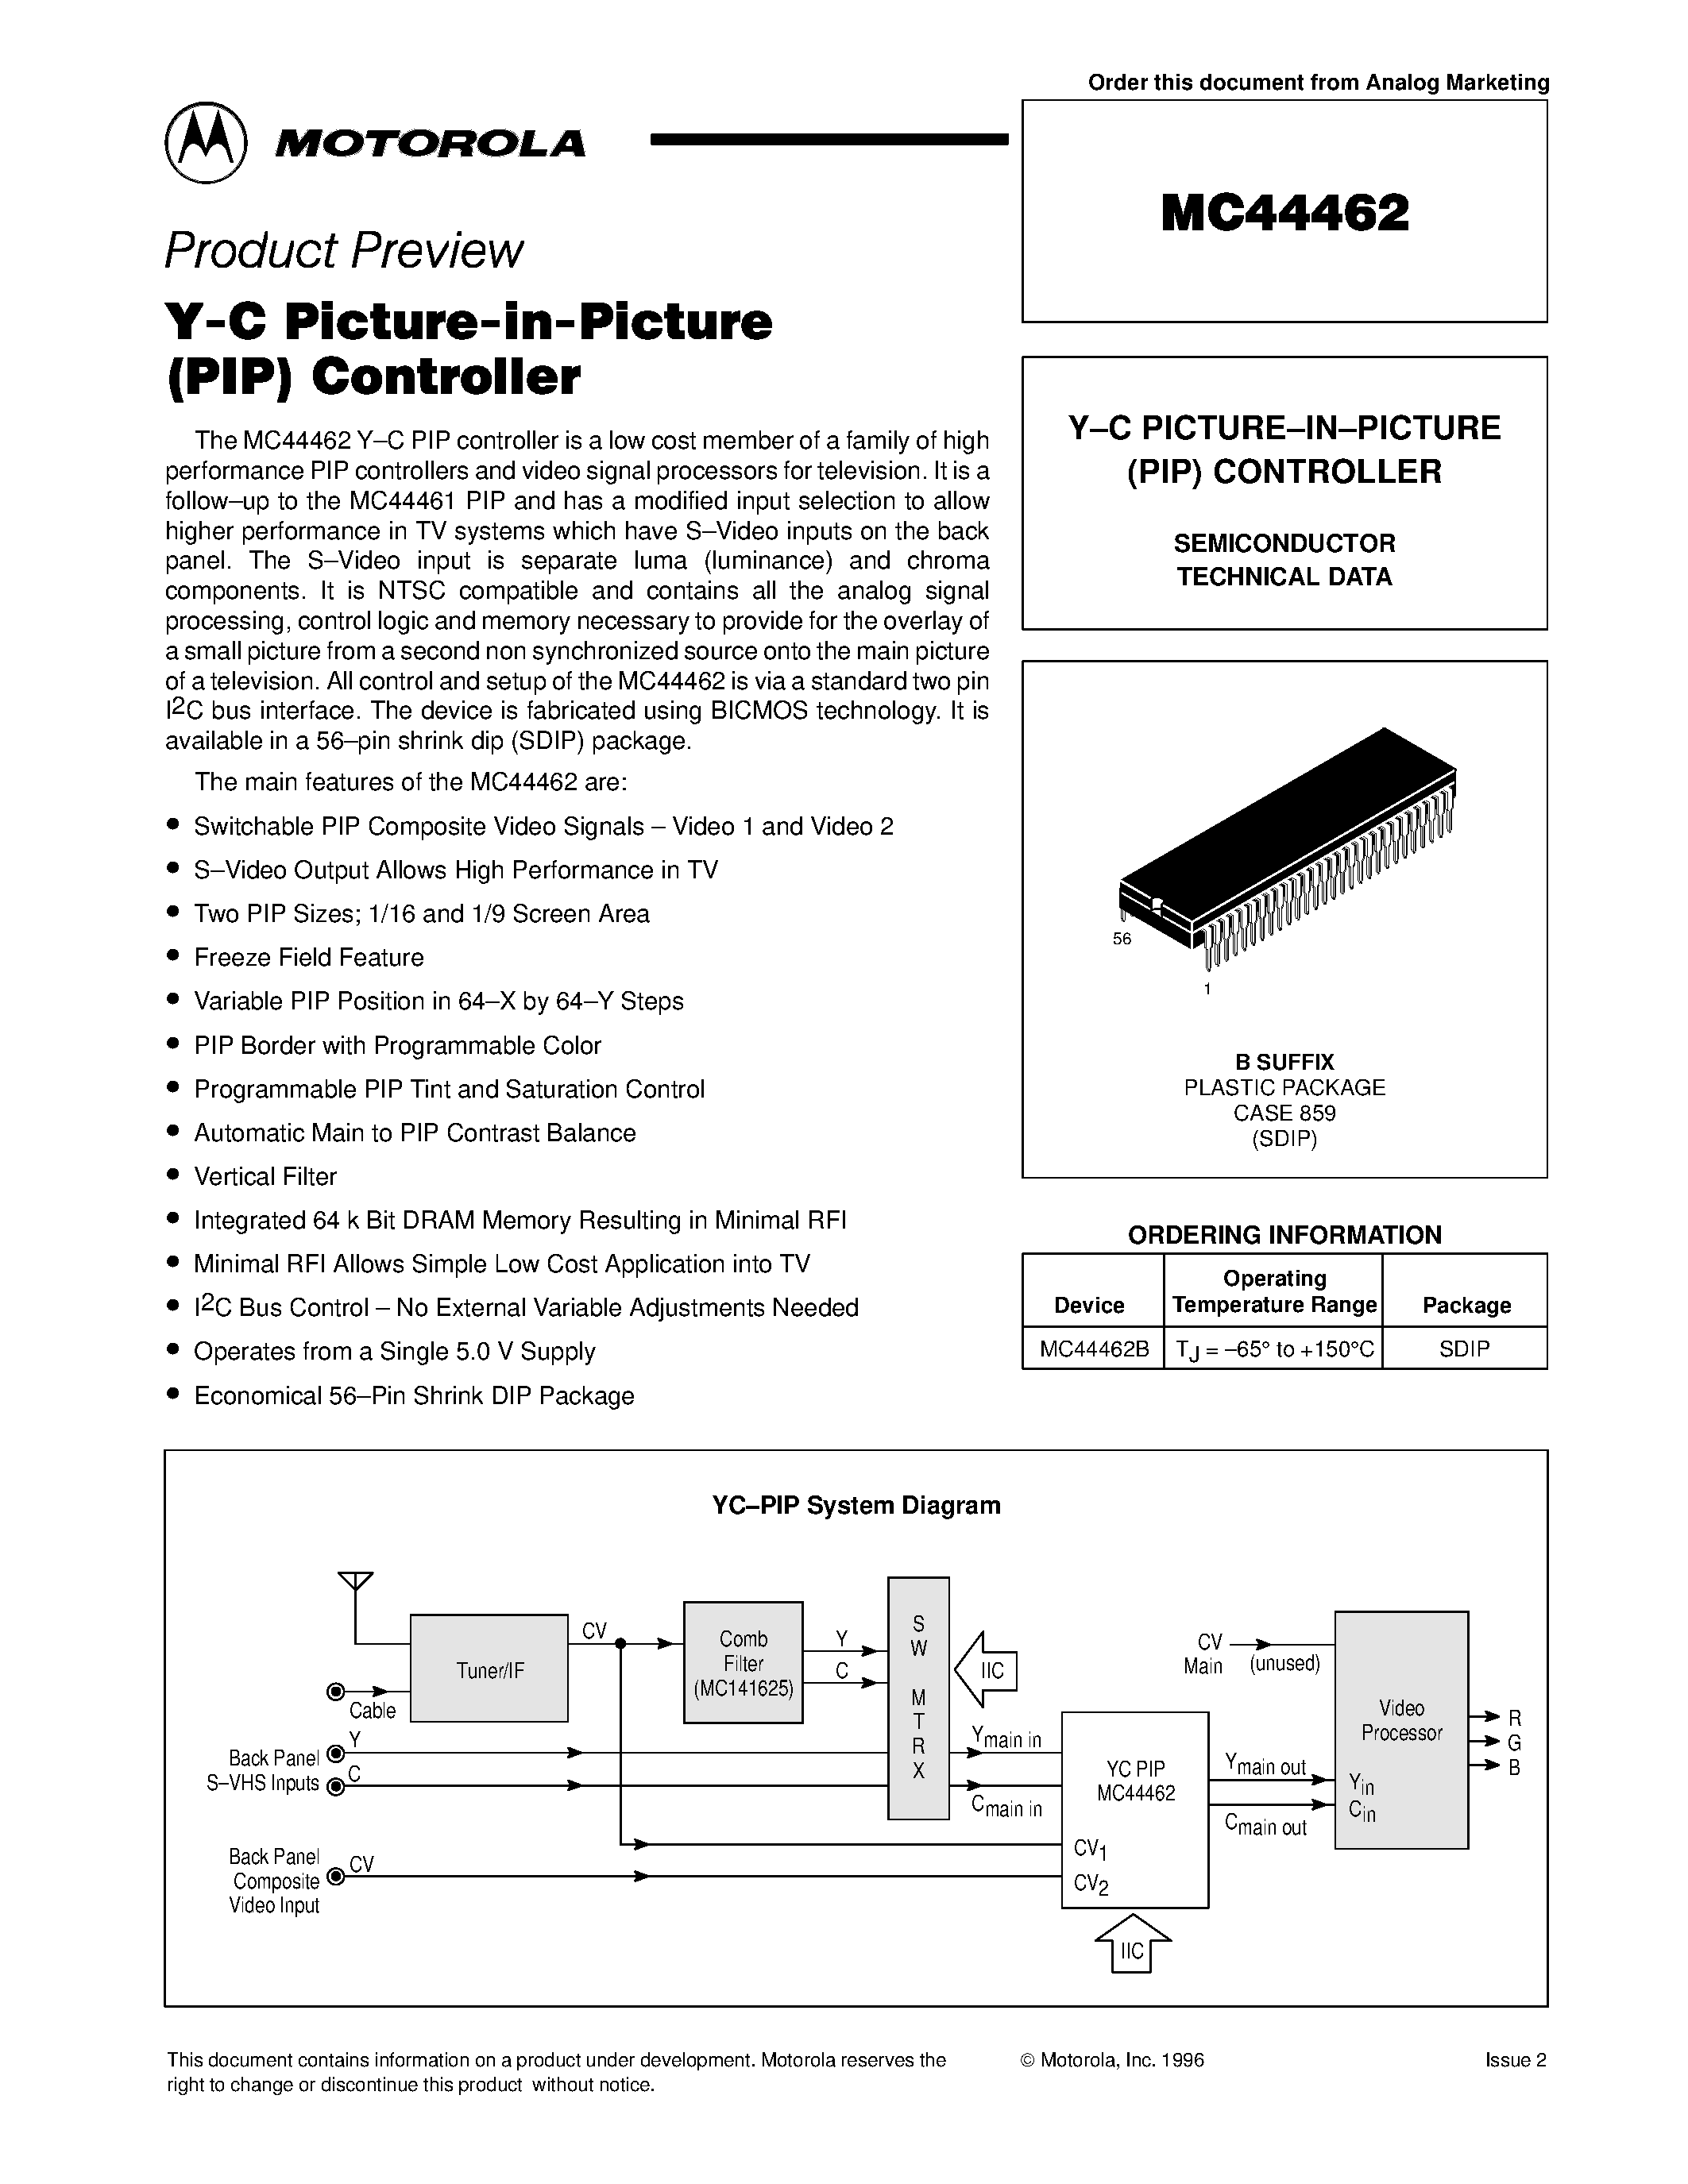 Даташит MC44462 - Y-C PICTURE-IN-PICTURE (PIP) CONTROLLER страница 1